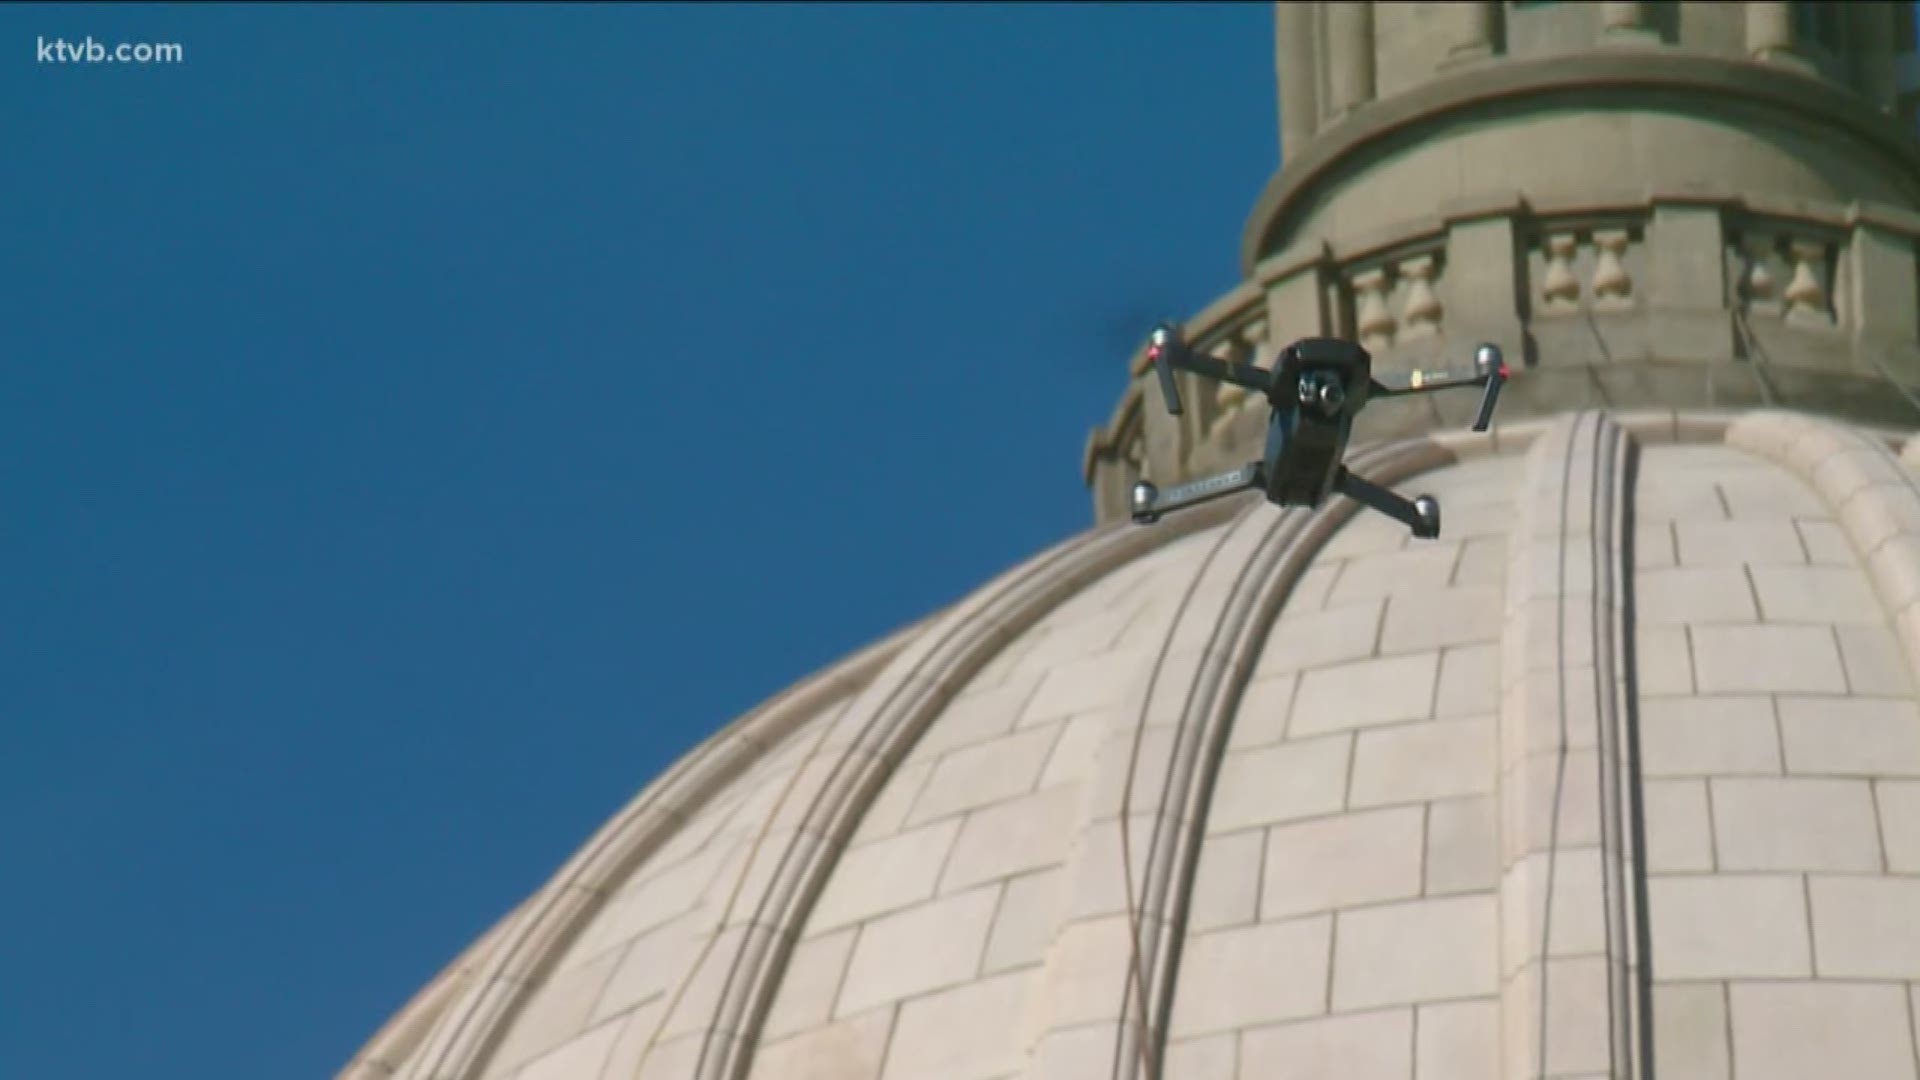 If passed, the bill would allow law enforcement agencies more flexibility to use drones without a warrant.